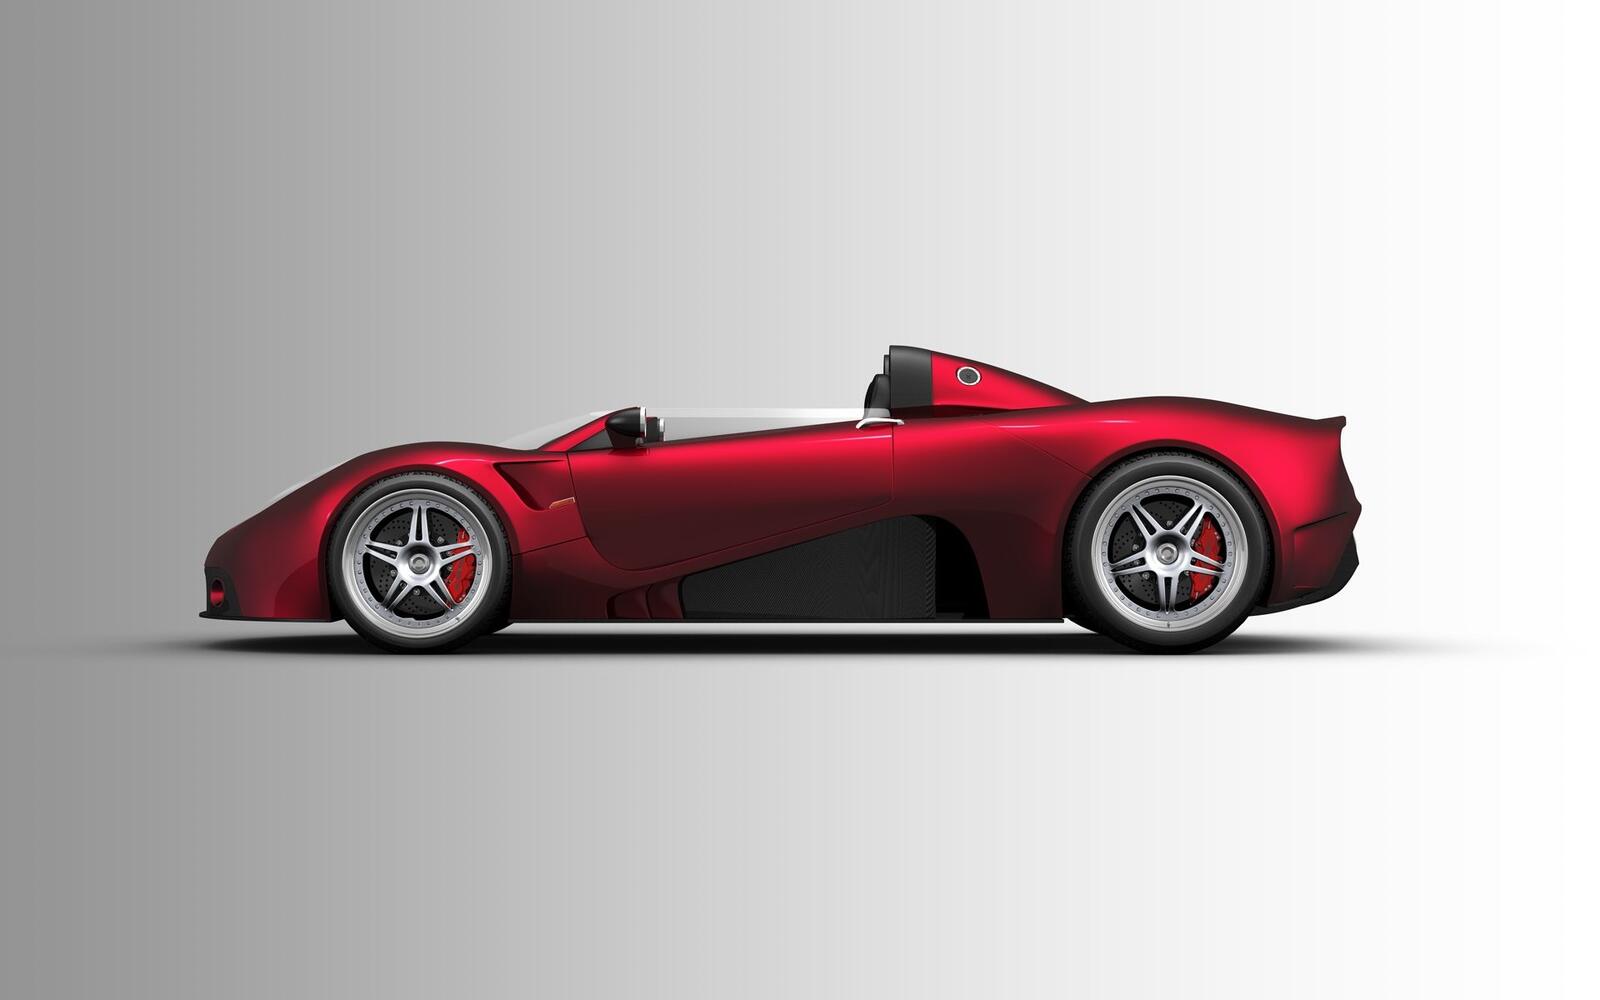 Wallpapers car red sports car on the desktop